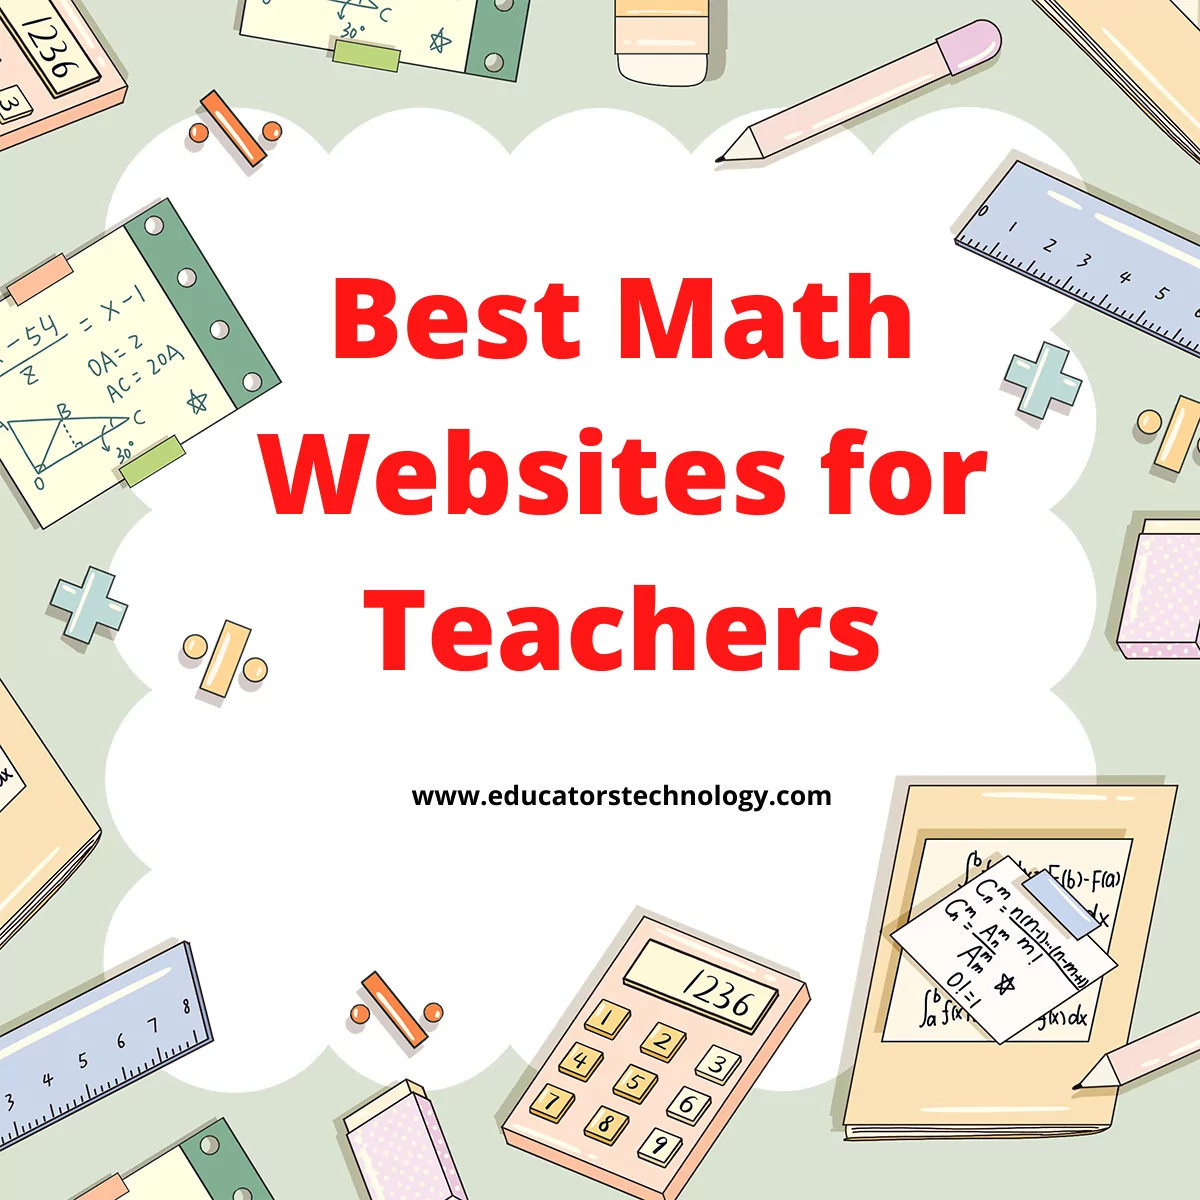 best-math-websites-for-teachers-and-students-educators-technology